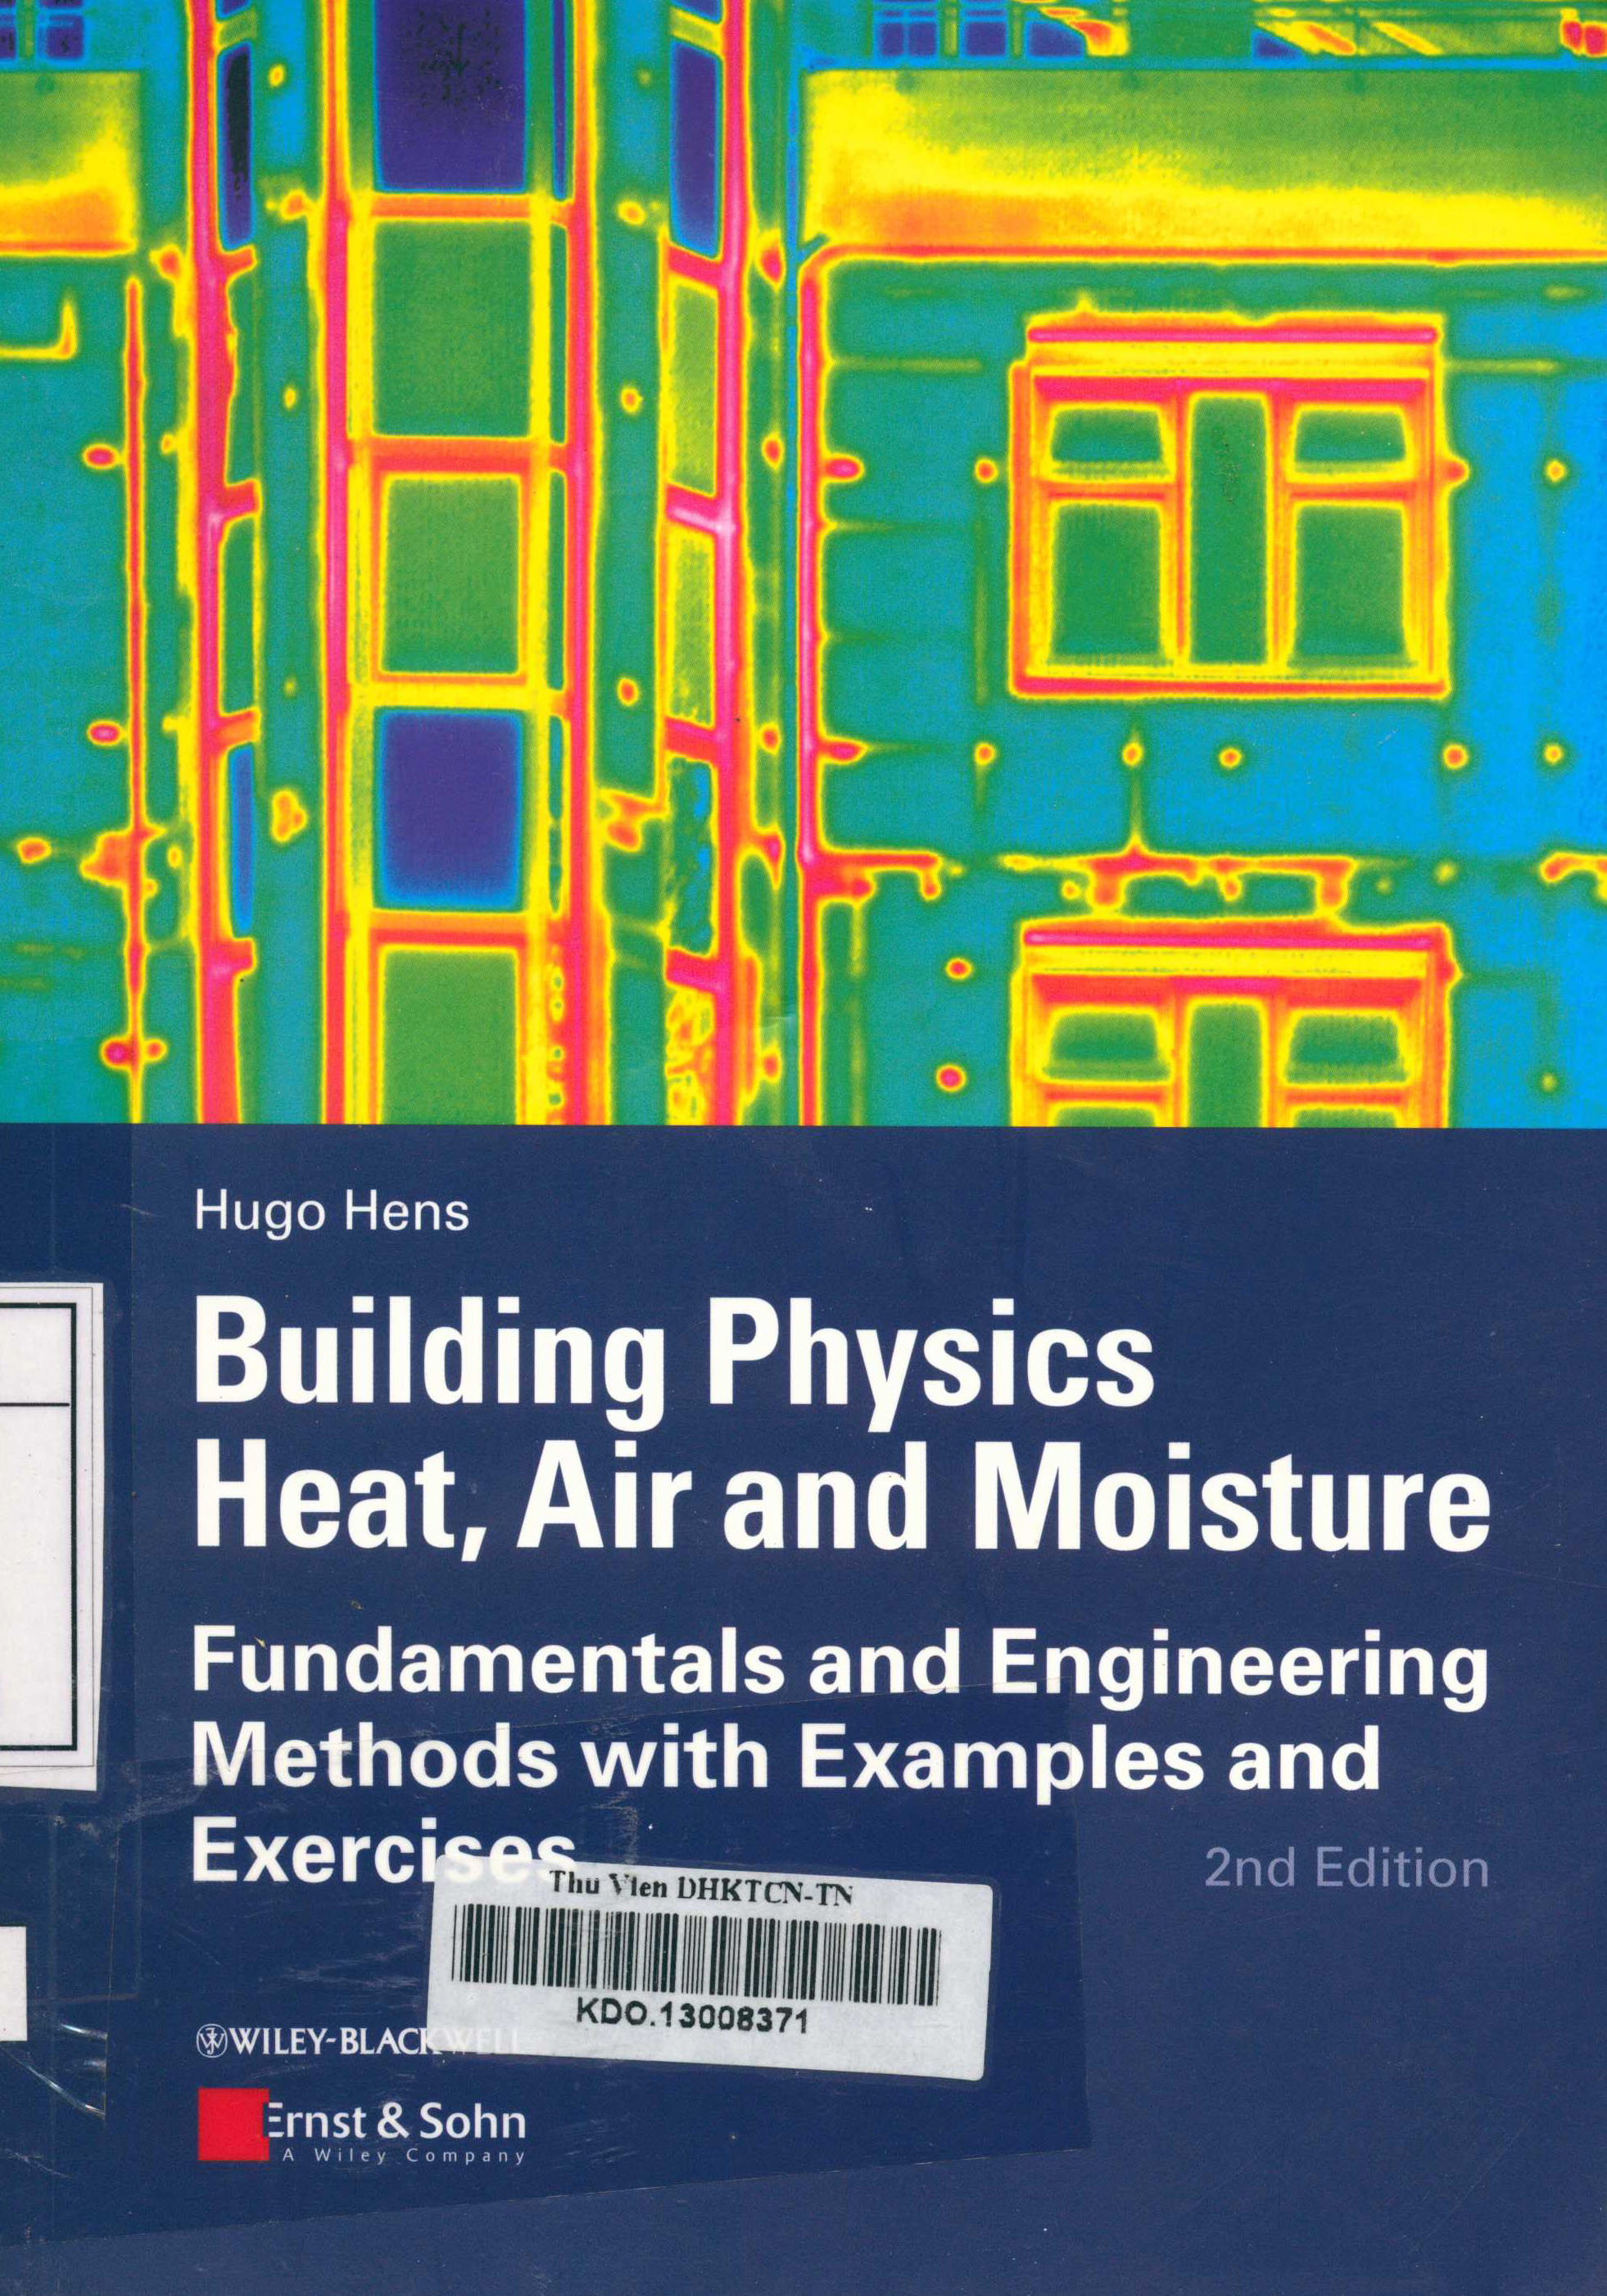 Building physics heat, air and moisture : Fundamentals and engineering methods with examples and exercises